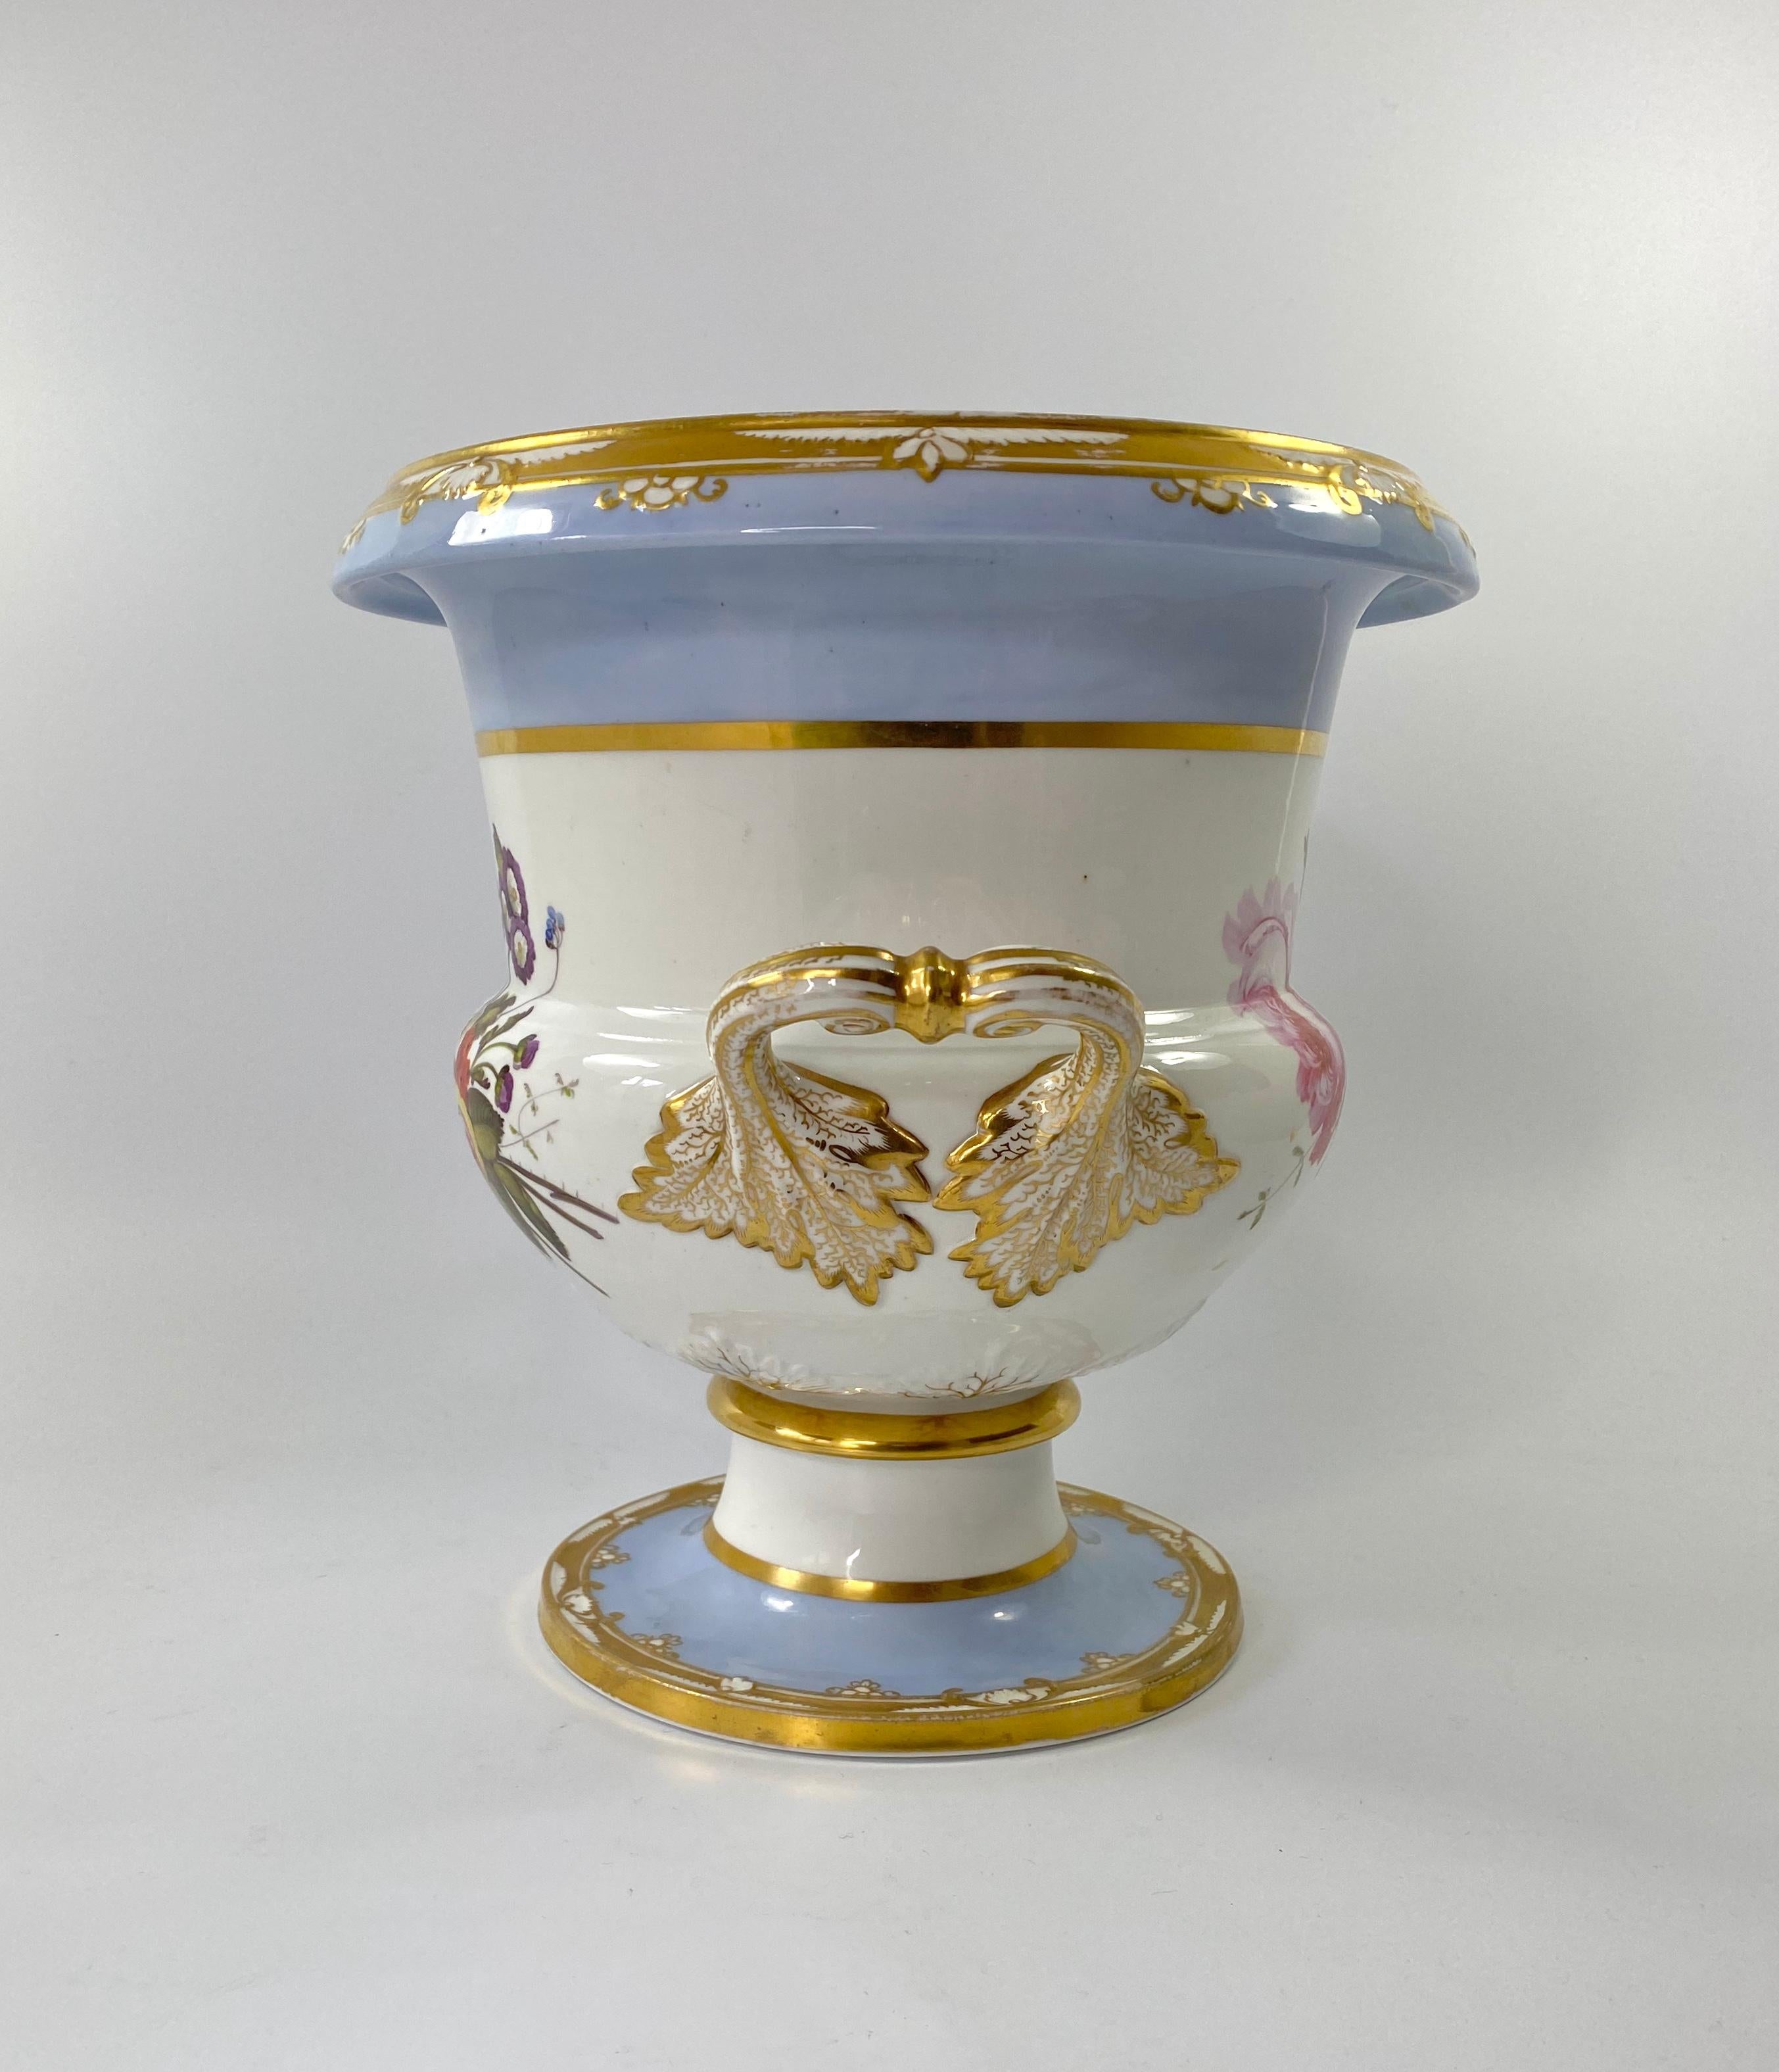 Early 19th Century Pair of Large Spode Porcelain Ice Pails, C. 1820